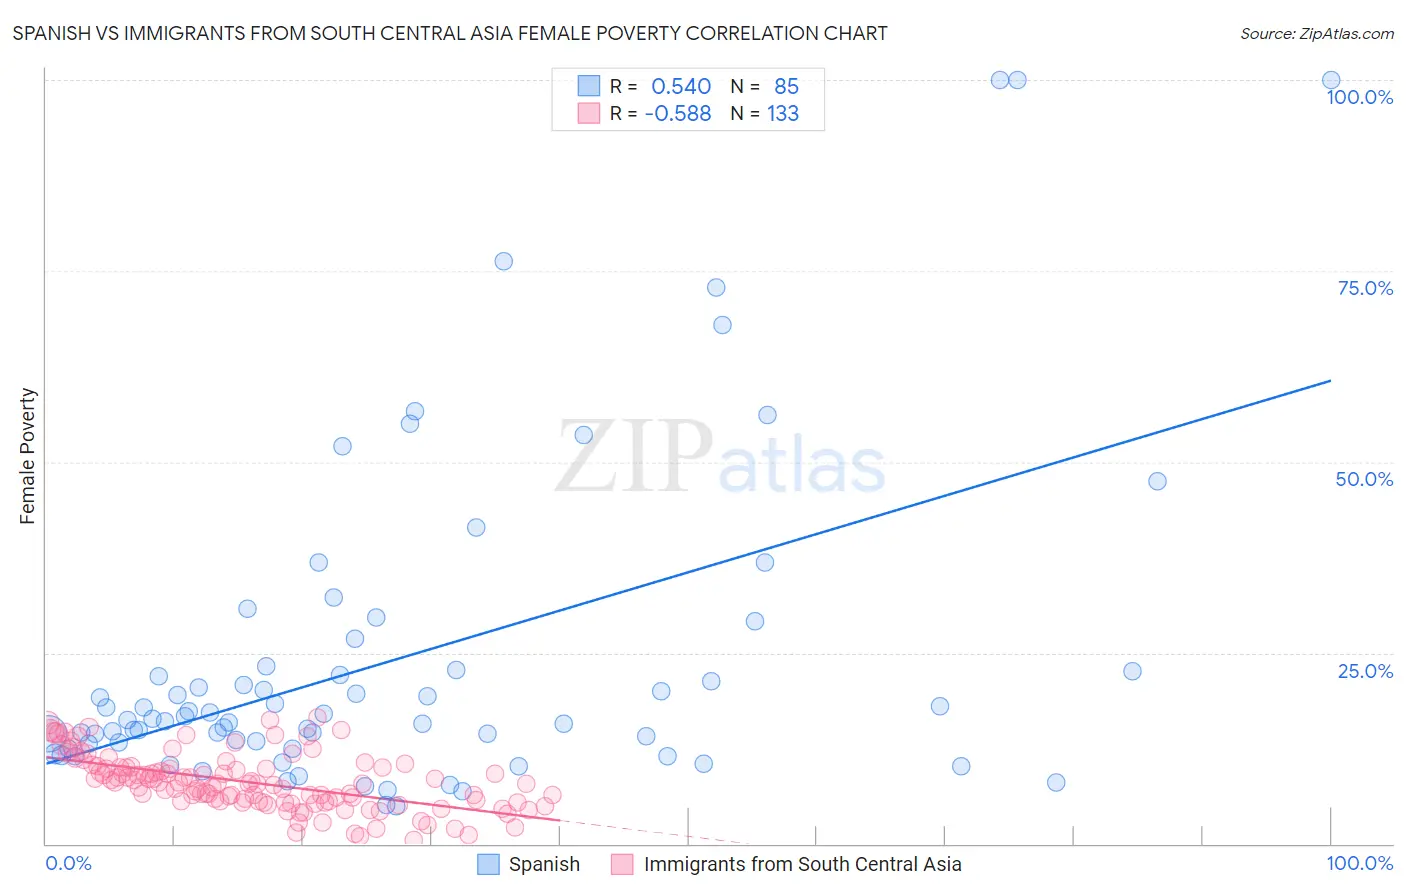 Spanish vs Immigrants from South Central Asia Female Poverty